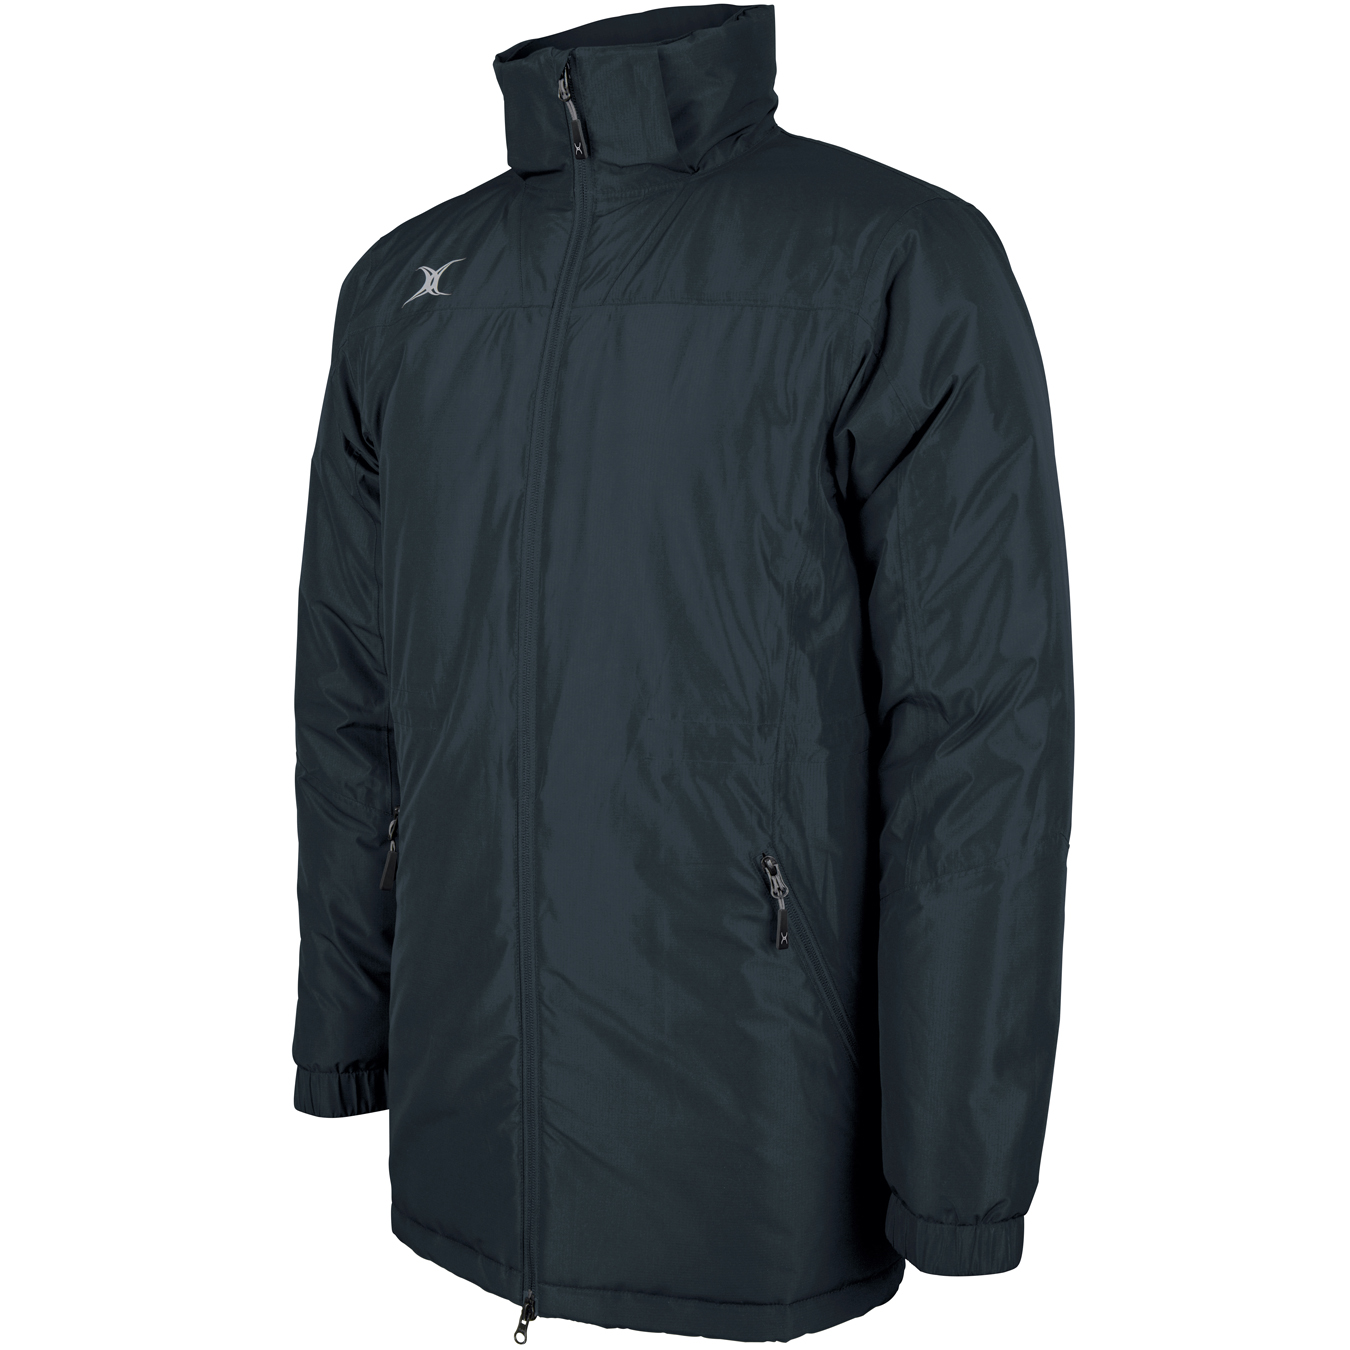 Gilbert Rugby Store Pro All-Weather Jacket | Rugby's Original Brand